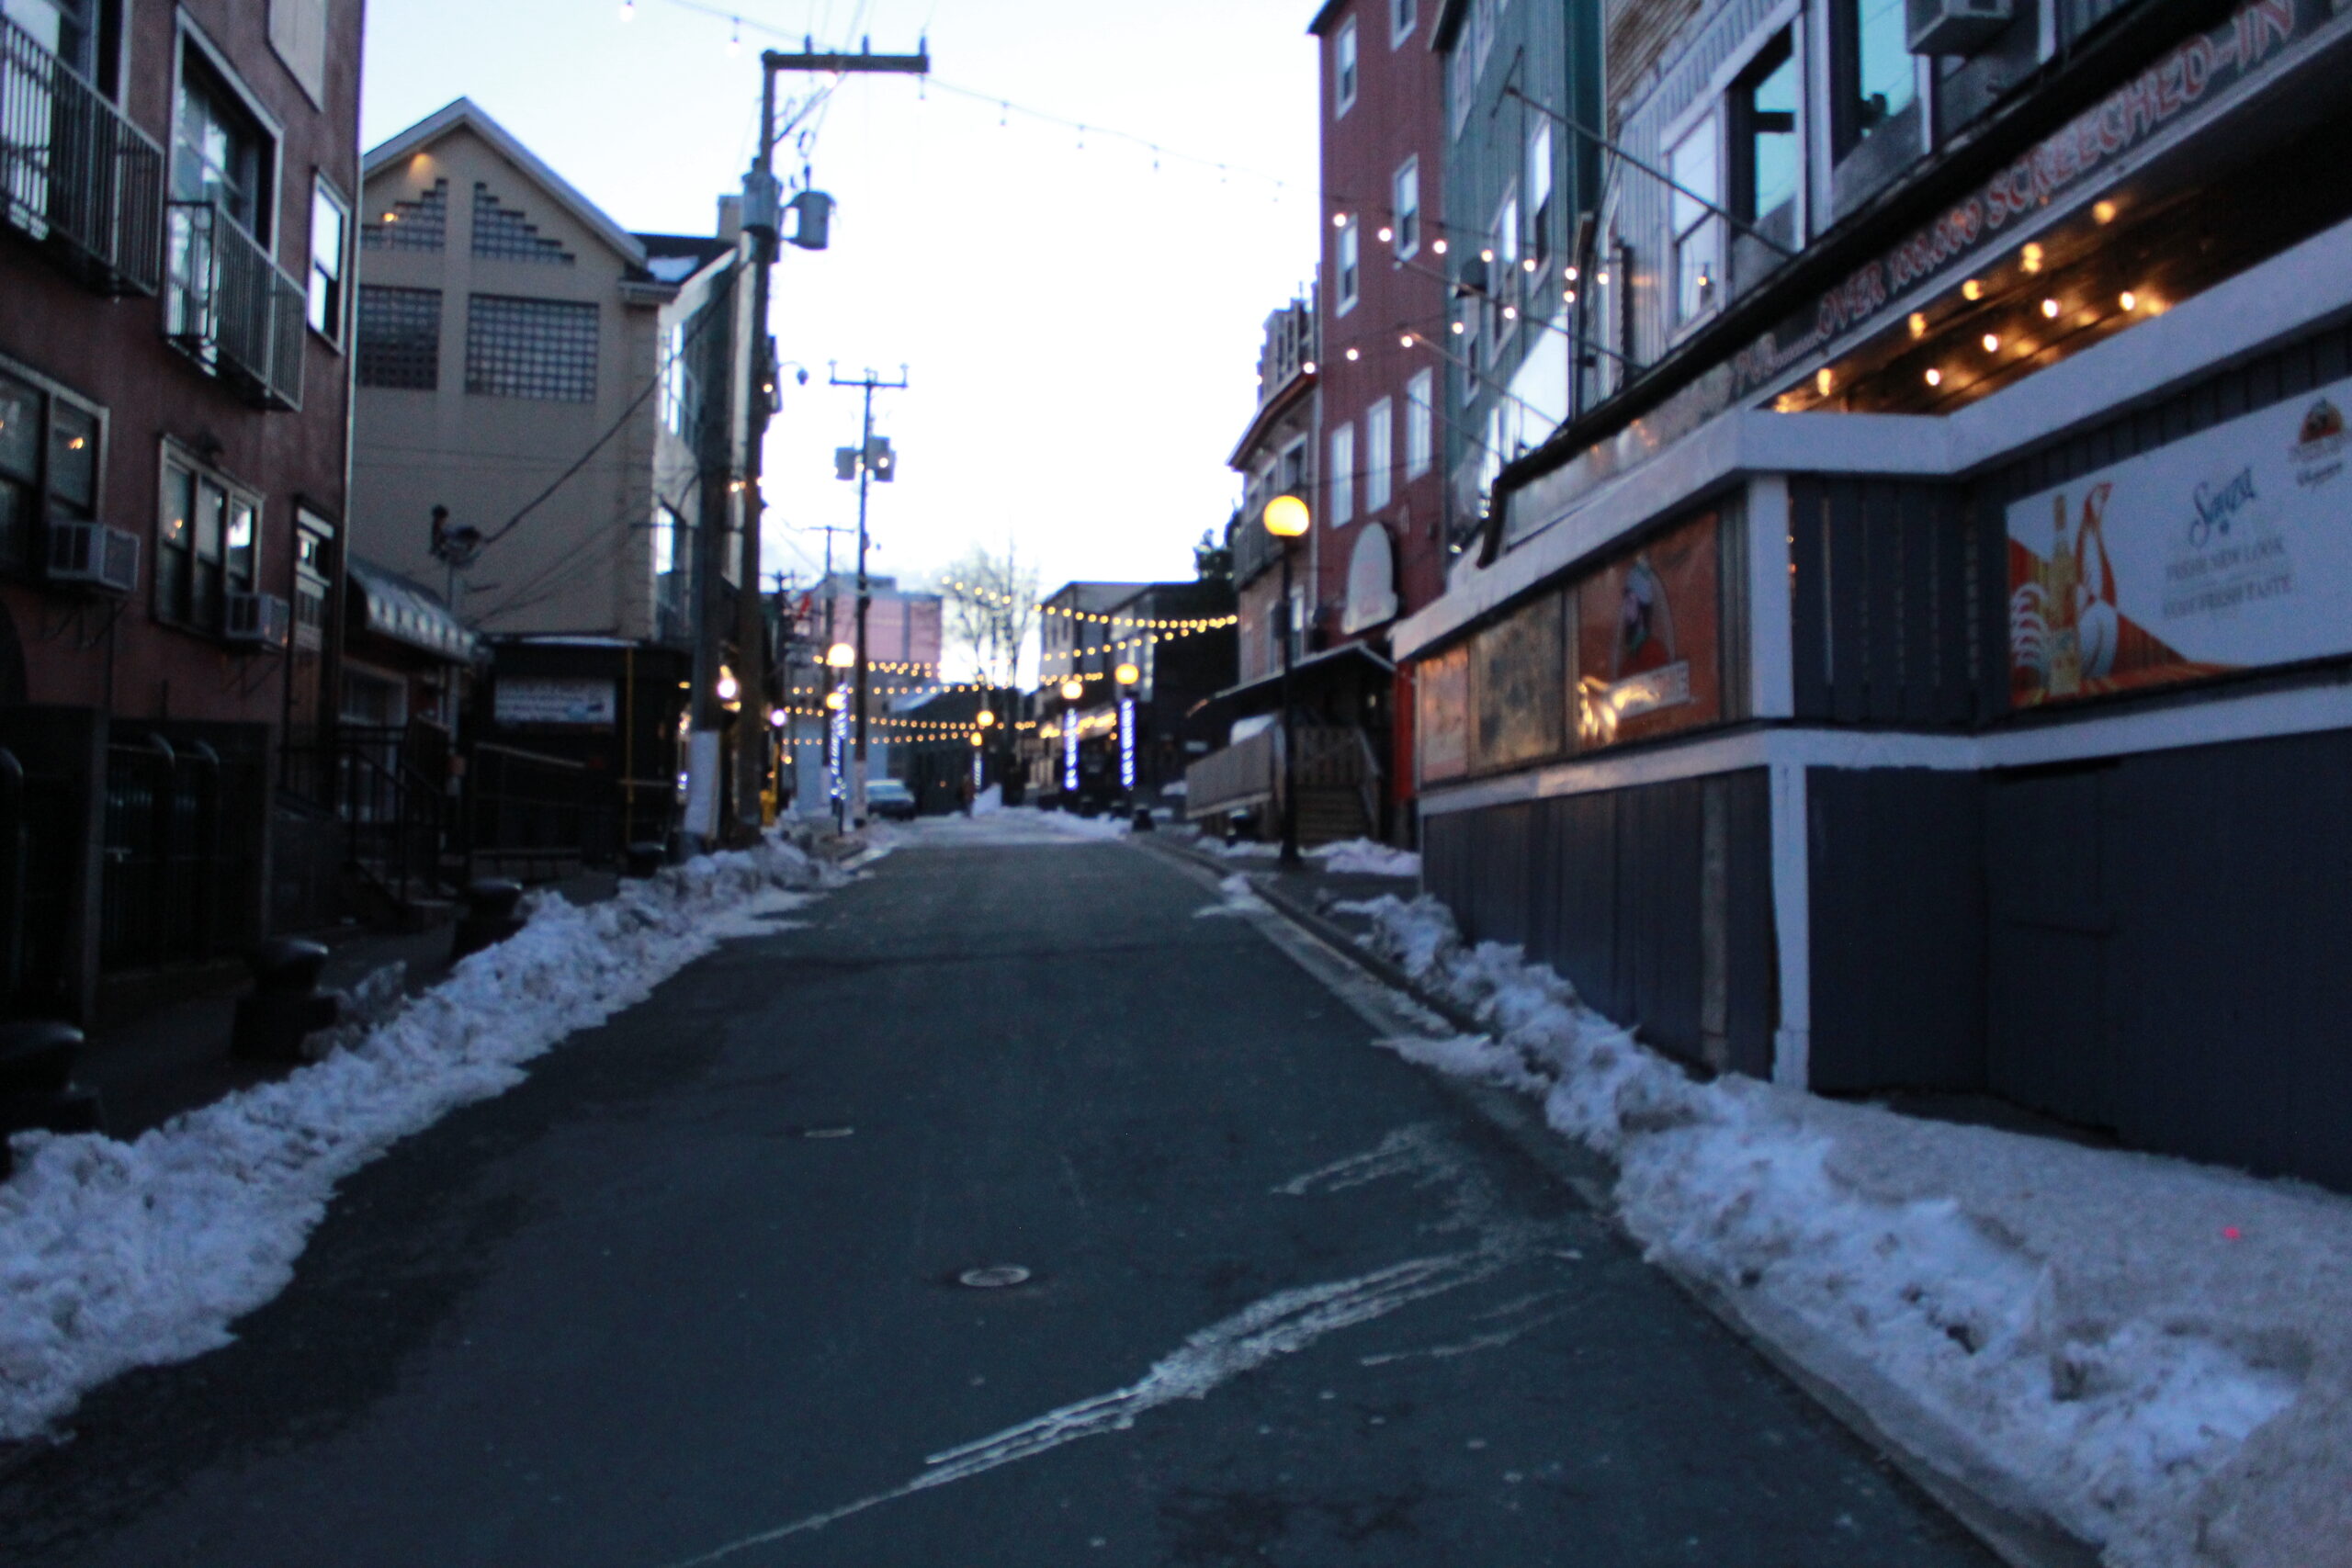 A narrow street lined with bars, clubs and breweries. Snow is accumulated on either side of the curbs. Its a clear day as the sun is setting in the sky, dusk. The road is empty expect for one person off in the distance. 